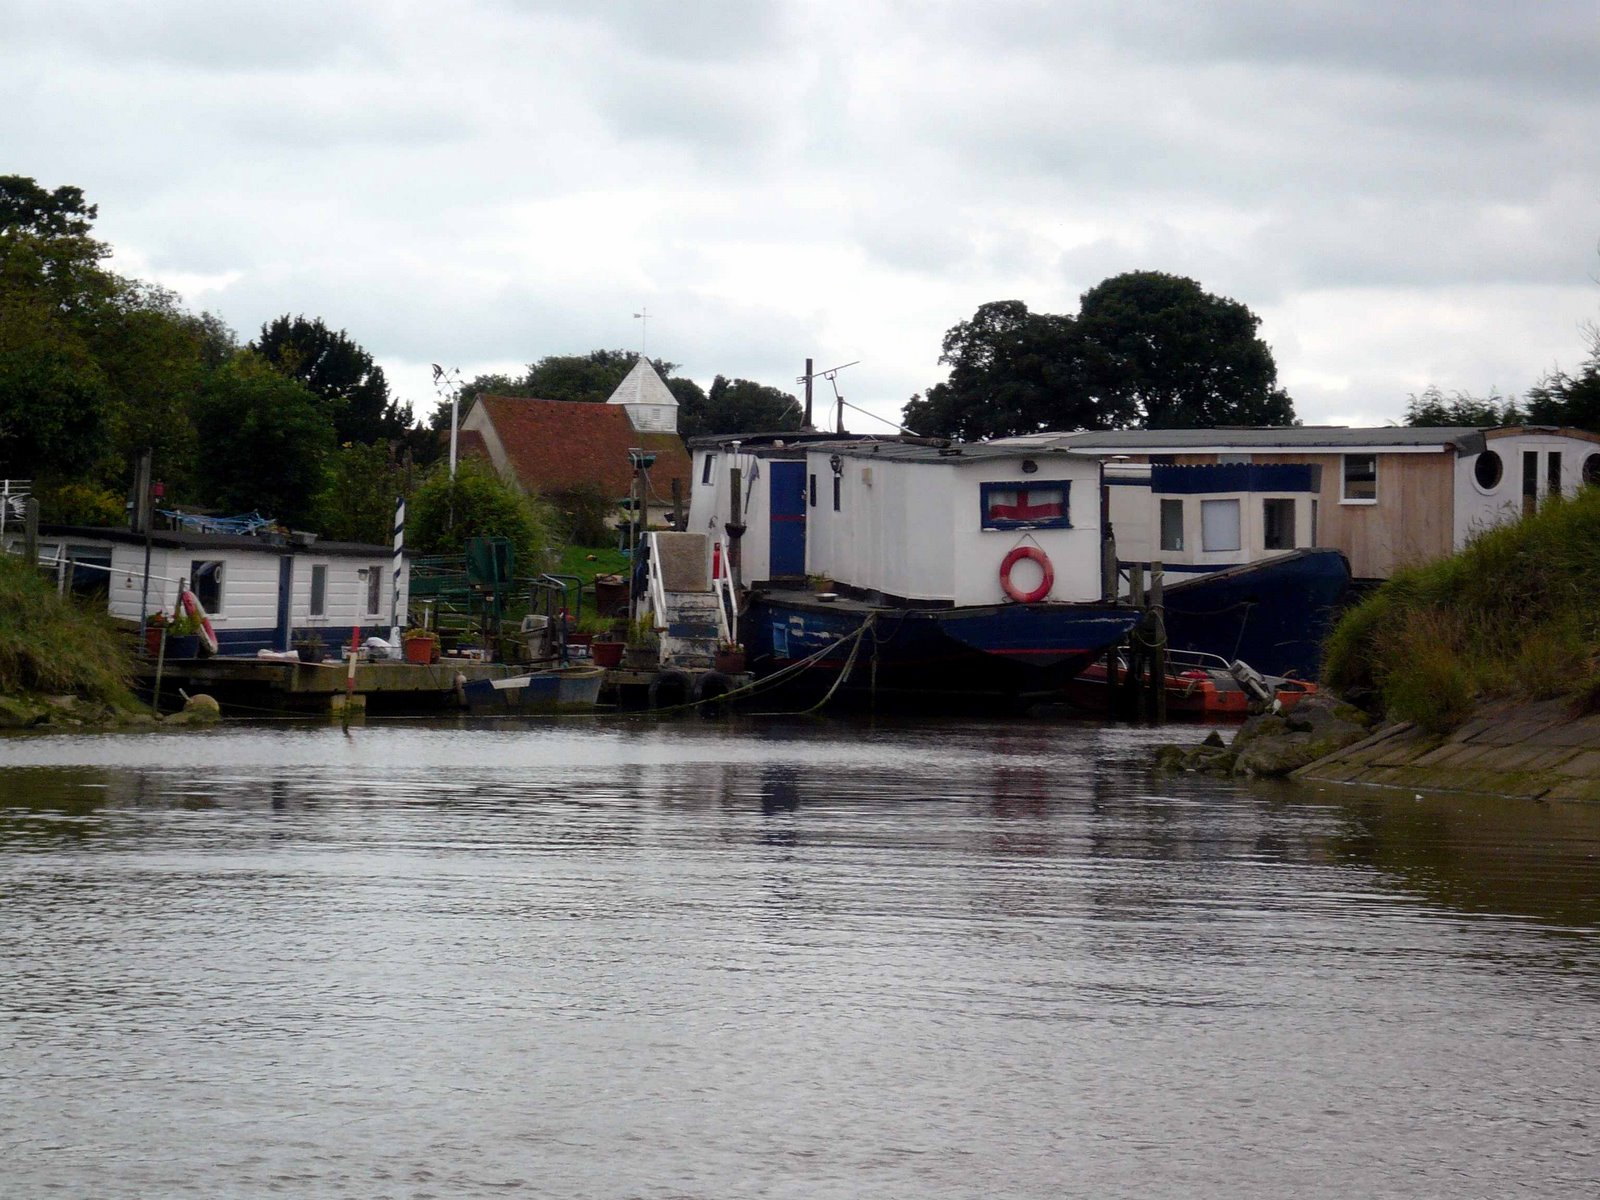 [Copy+of+Ford+houseboats.jpg]